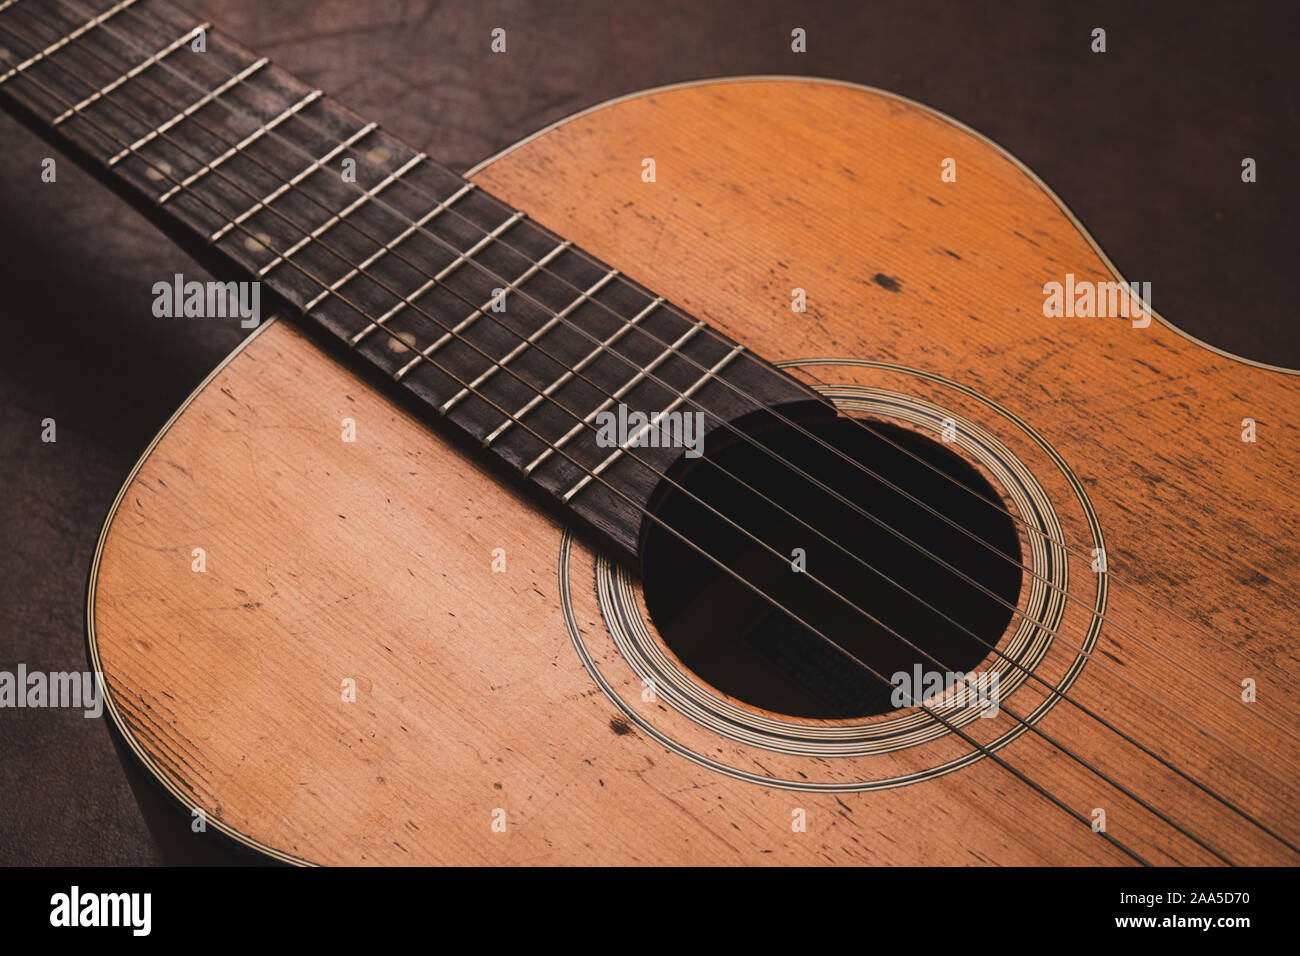 Macro close up music concept acoustic guitar body wooden vintage old fashioned Stock Photo